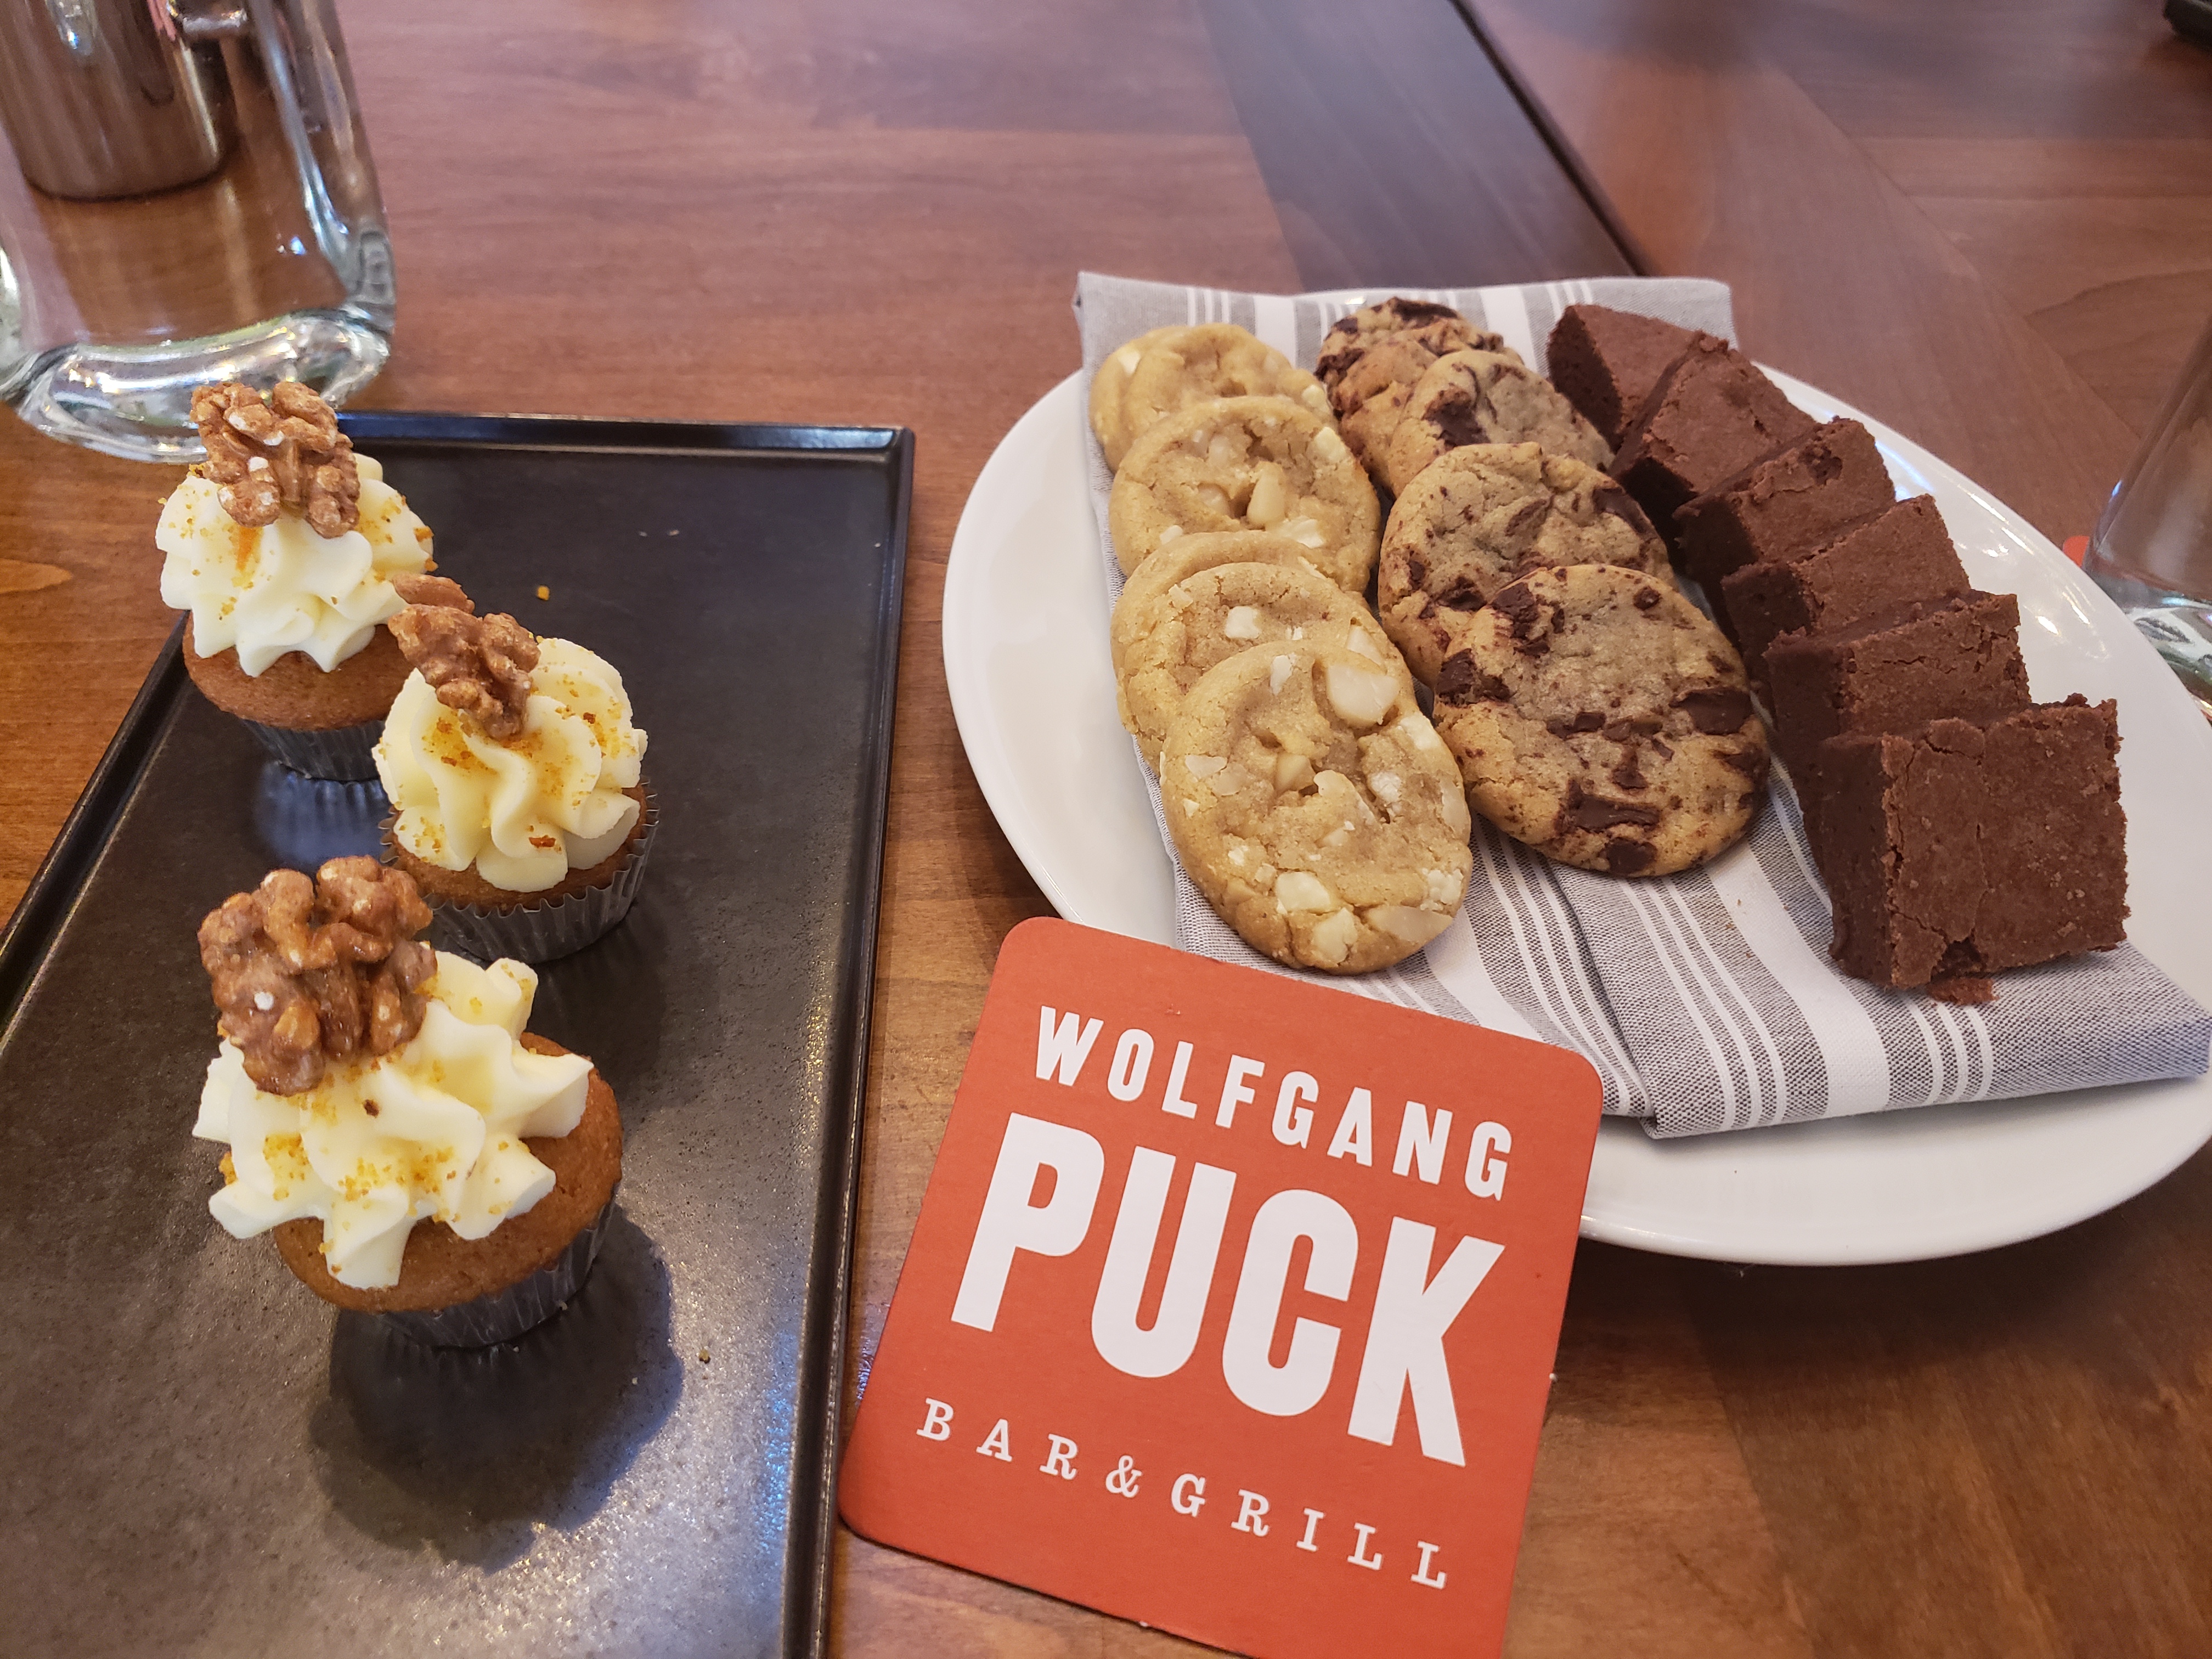 Disney Springs Wolfgang Puck Bar & Grill Lunch Review